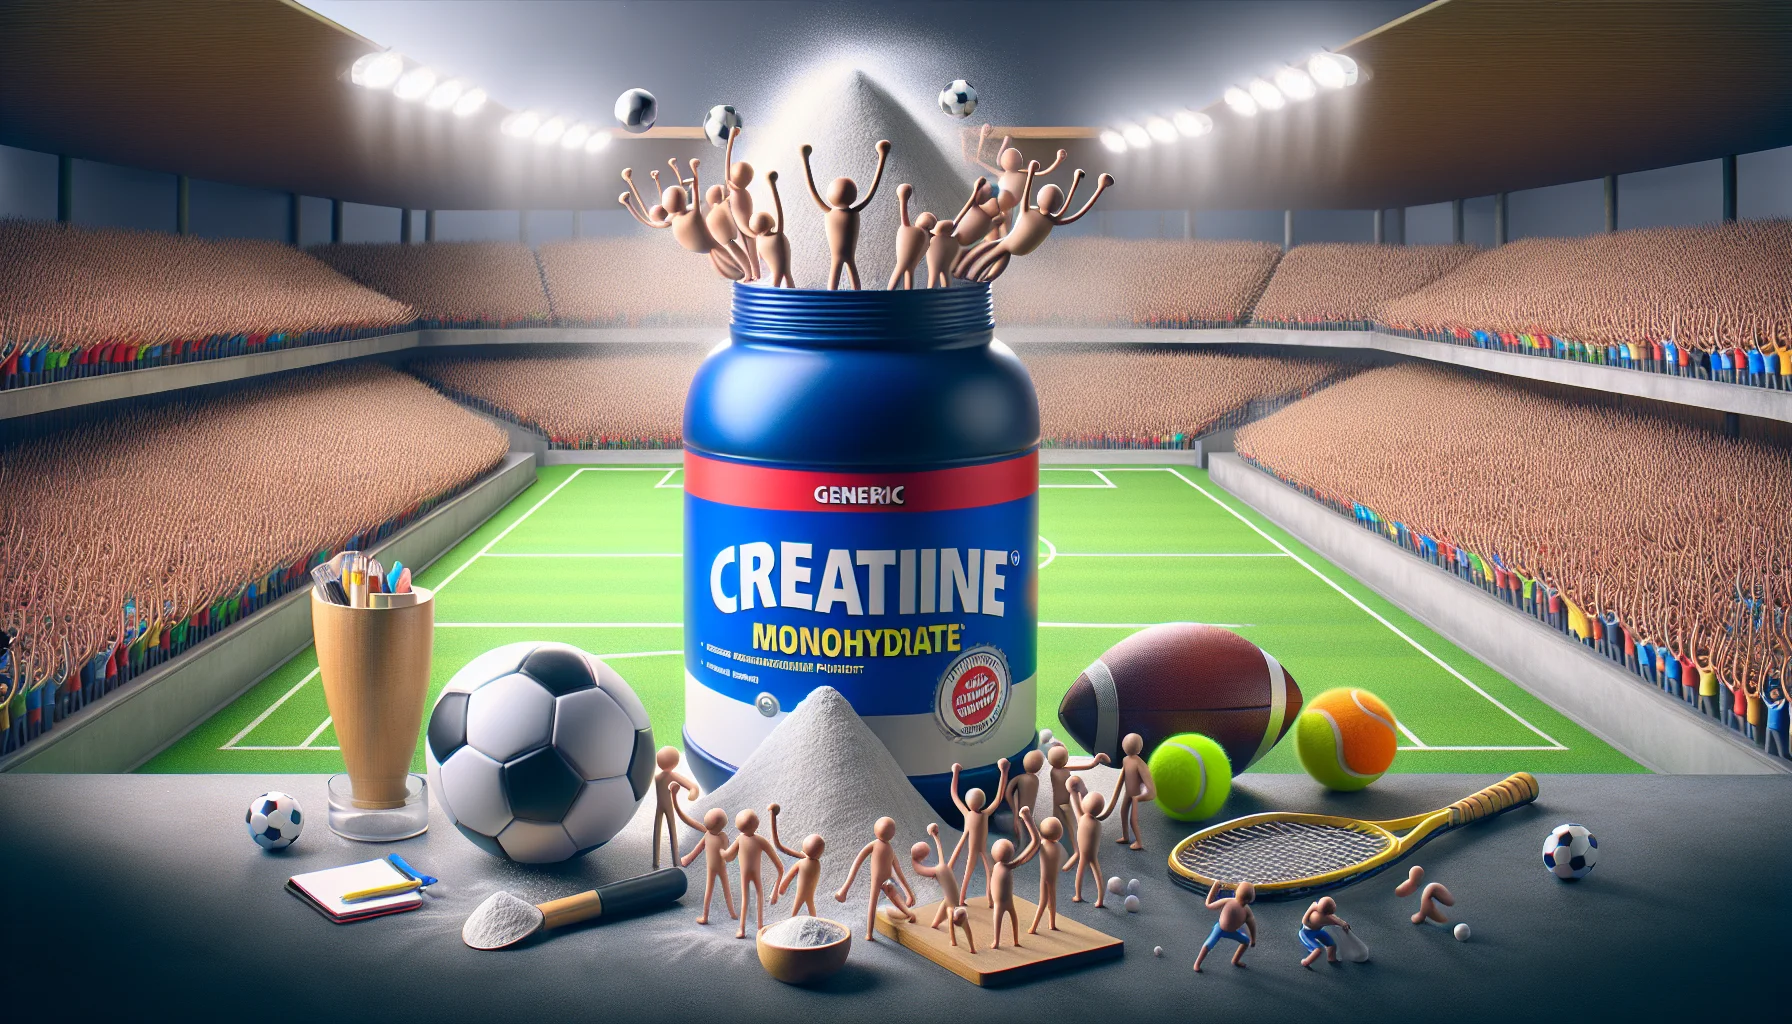 Create a humorous picture that features a generic creatine monohydrate powder canister made by an unknown brand, depicted in a creative and enticing environment conducive for sports. The scene could be a caricature of a stadium filled with cheering crowd, and perhaps a soccer ball and tennis racket nearby, playfully suggesting that the creatine supplement has its own fan club. An overwhelming happiness permeates the scene, thereby making the prospect of using such sports supplements appear more appealing.